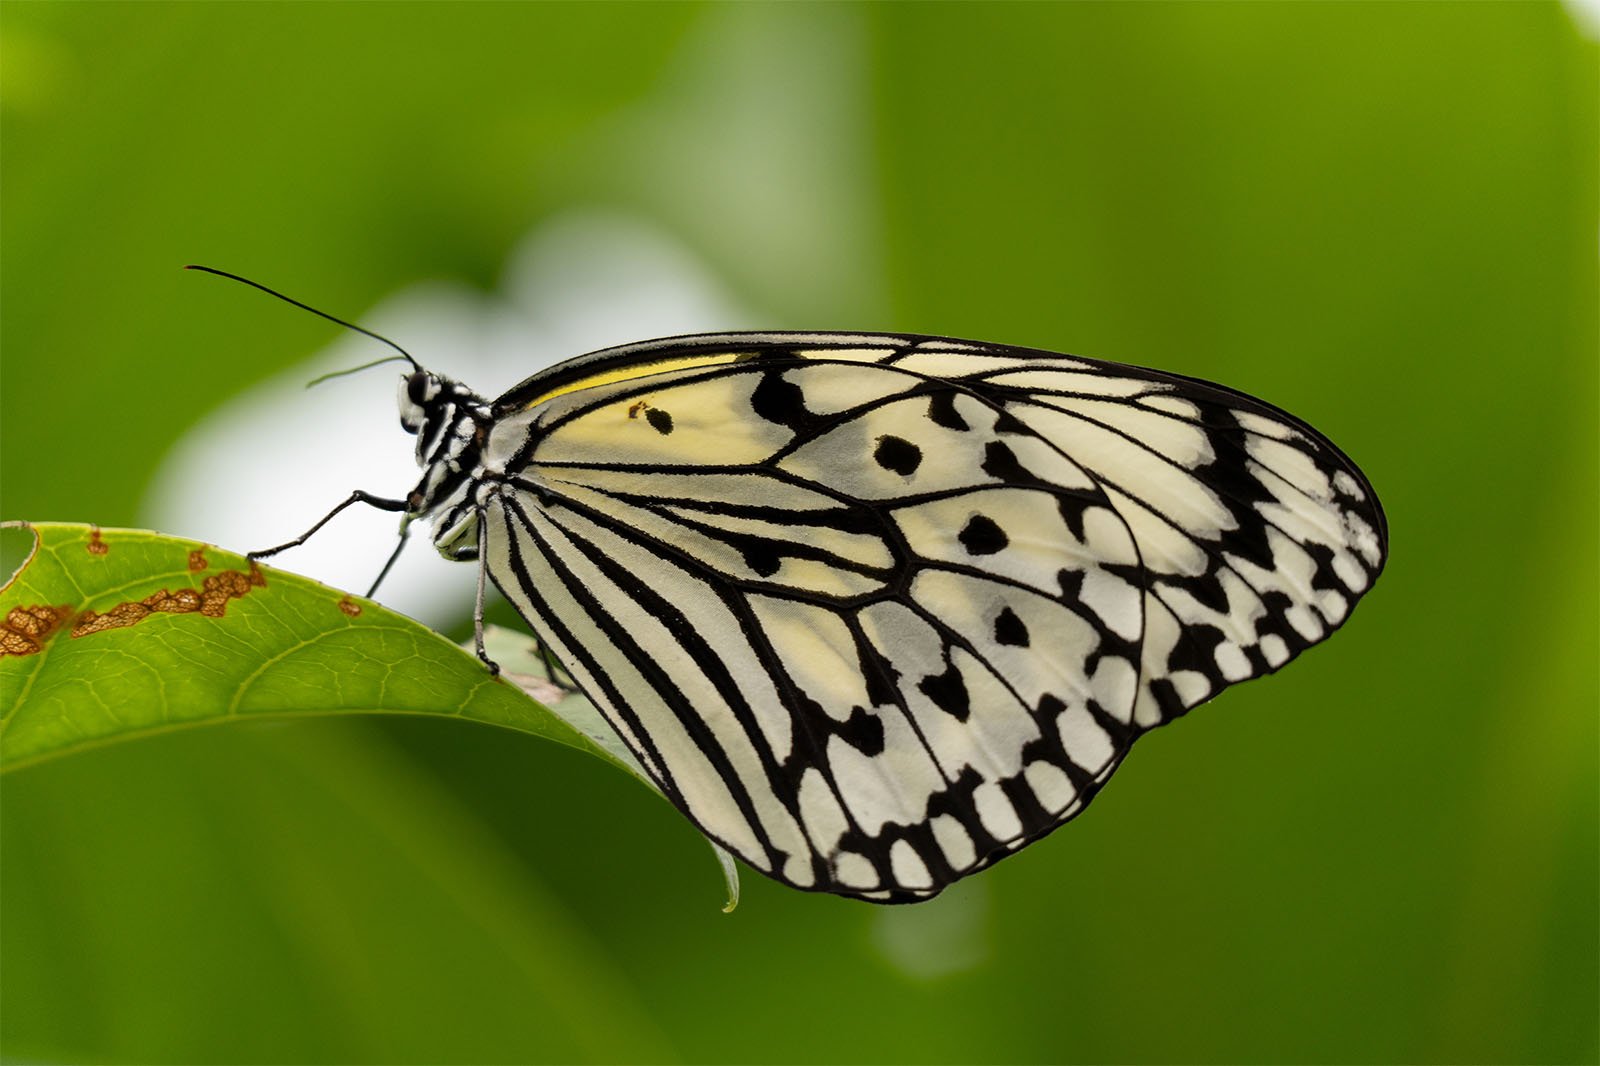 A black-and-white butterfly with distinctive patterns on its wings, stands perched on a green leaf against a blurred green background.